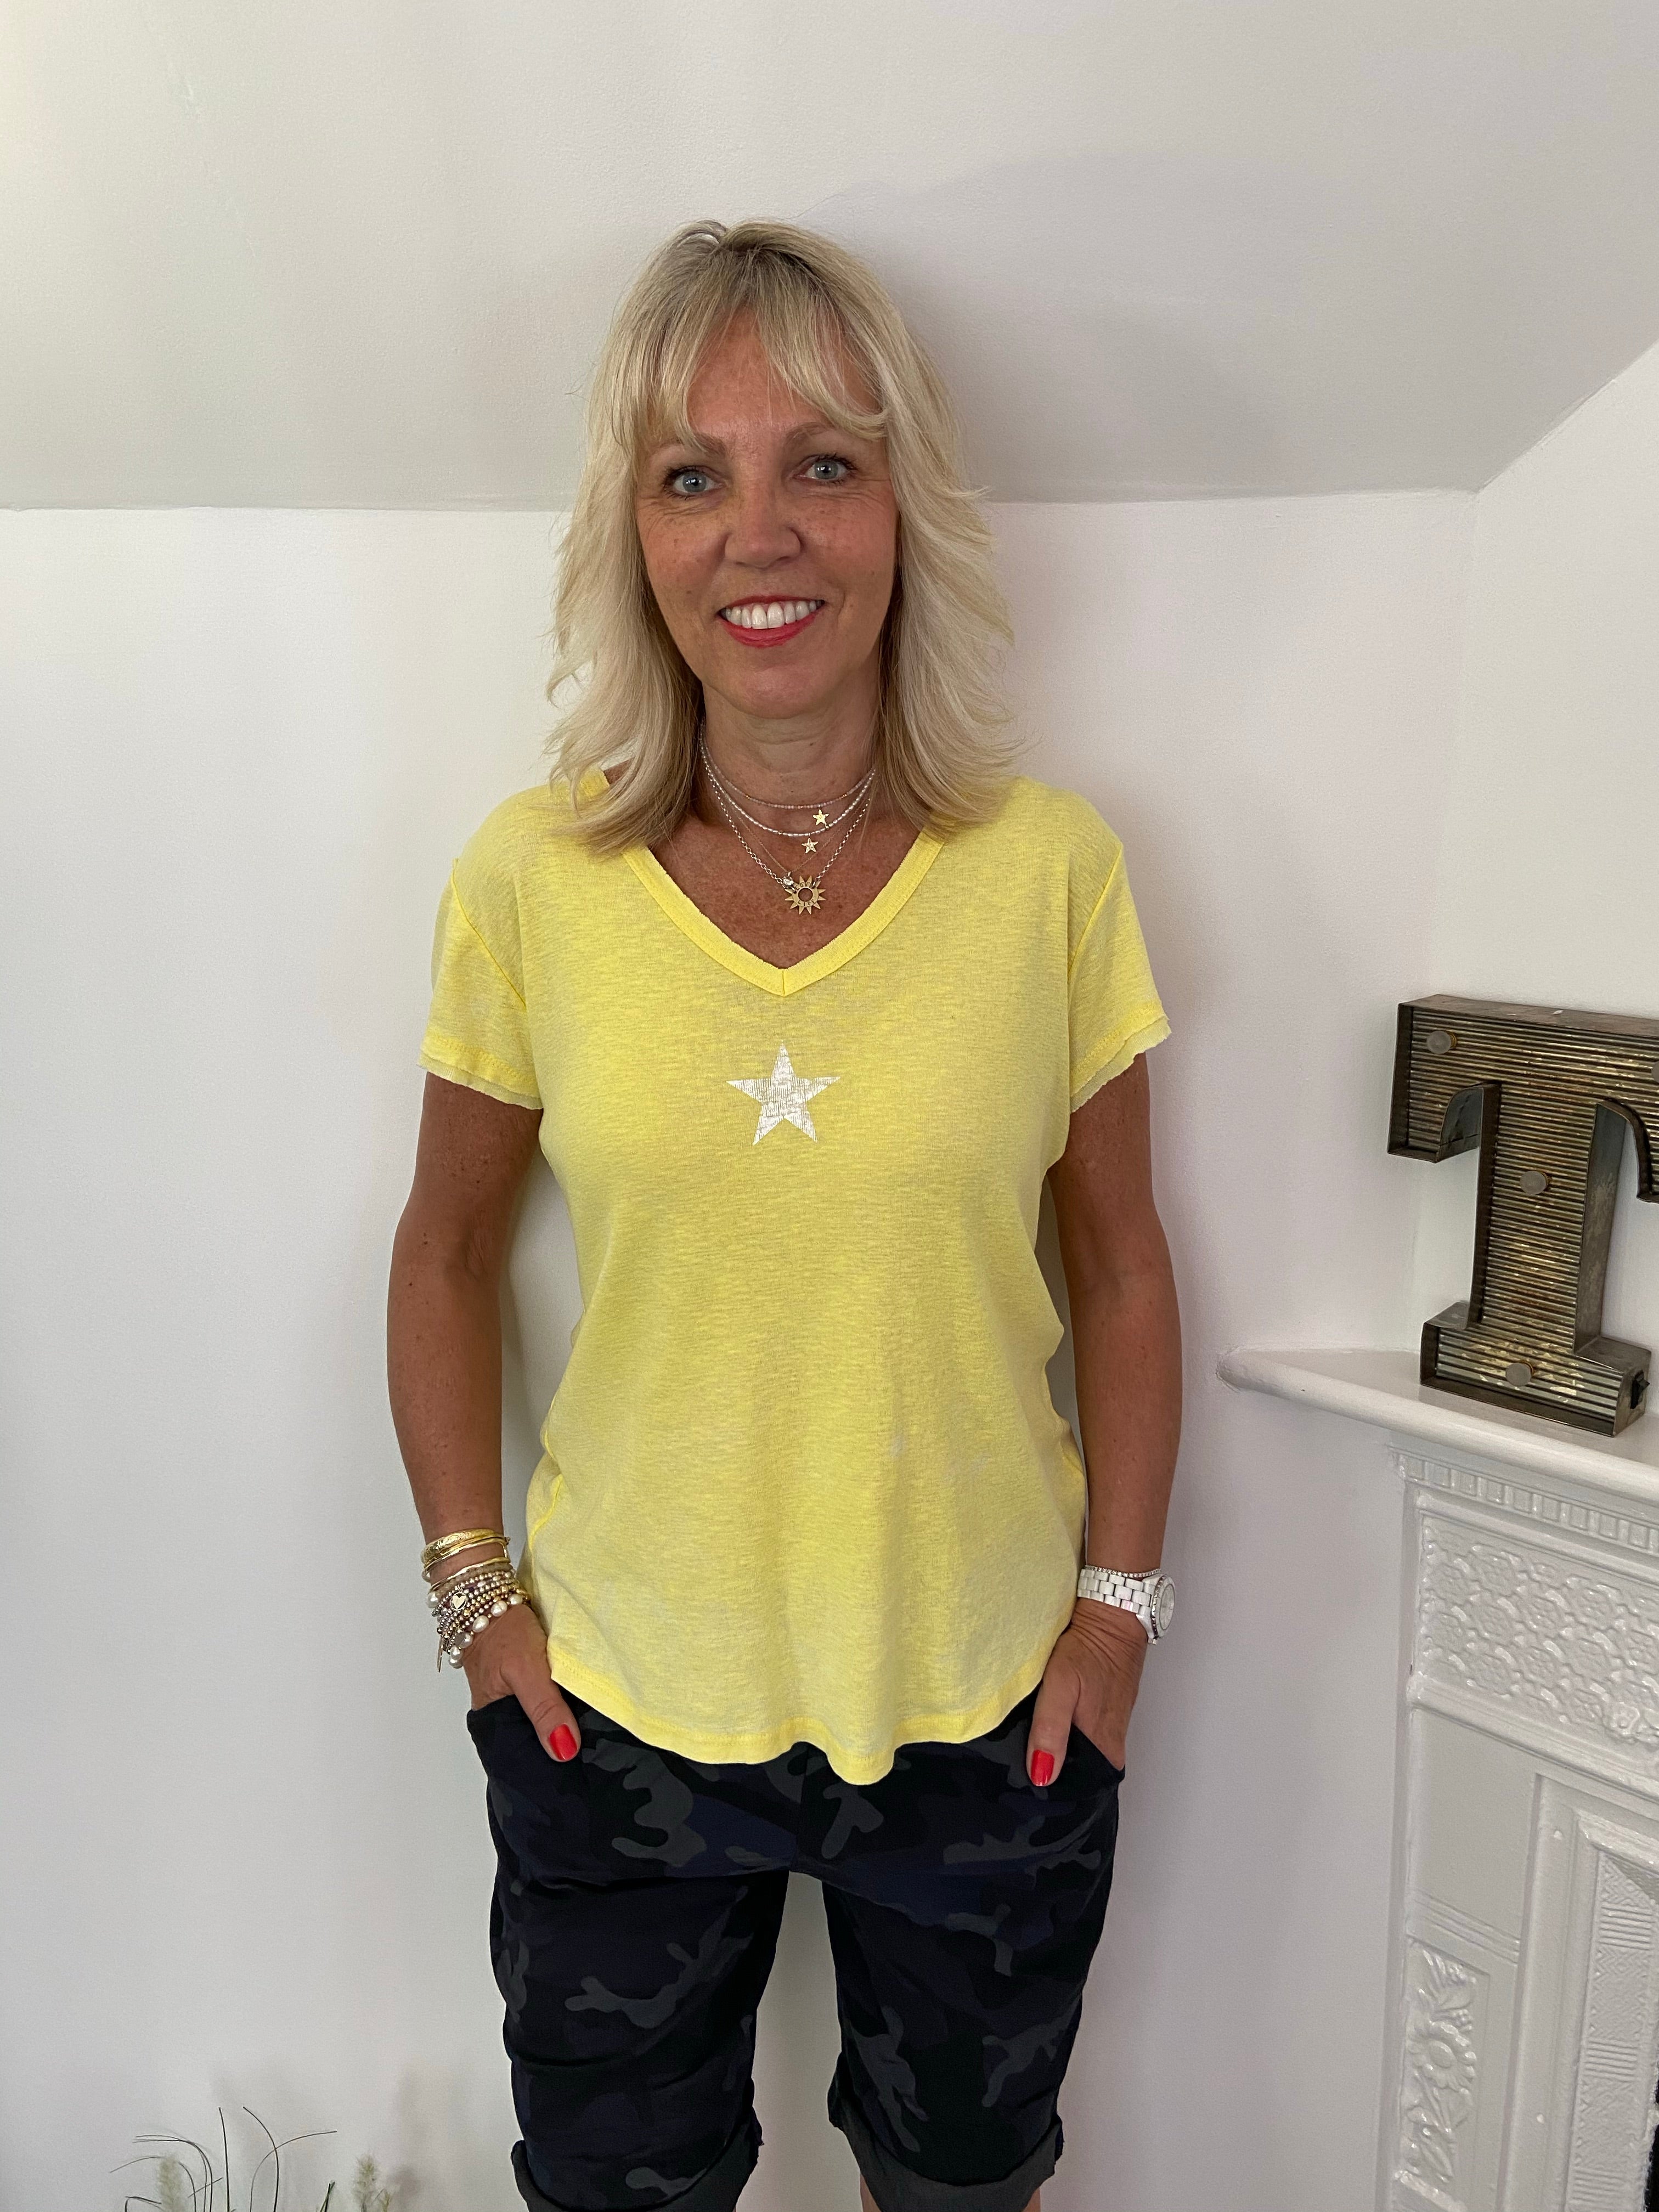 Vintage Star Tee in Yellow